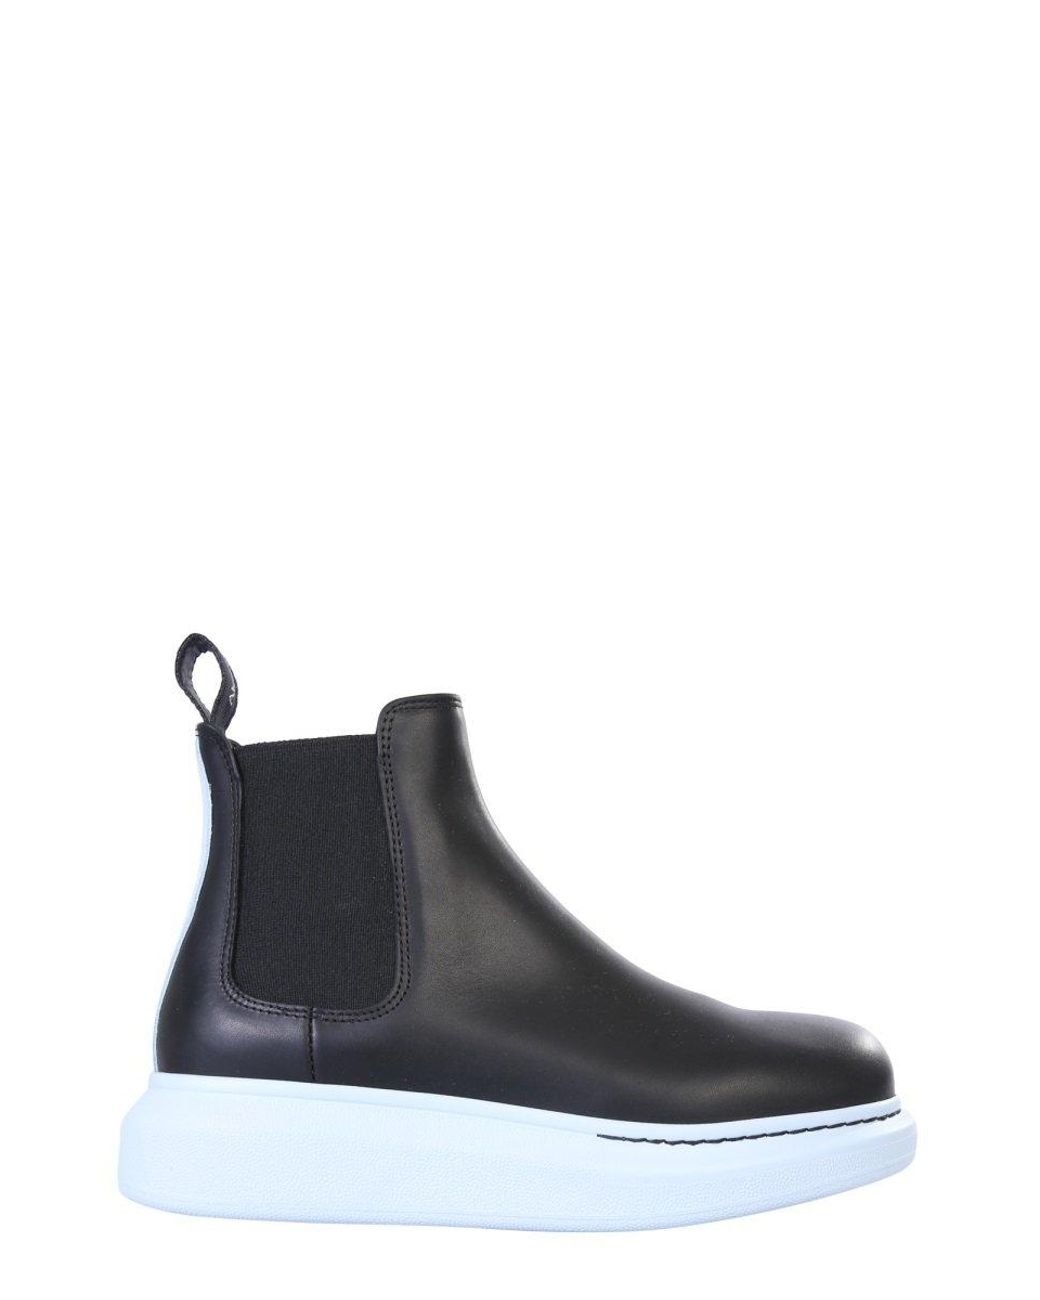 Alexander McQueen Leather Hybrid Chelsea Boots in Black - Lyst